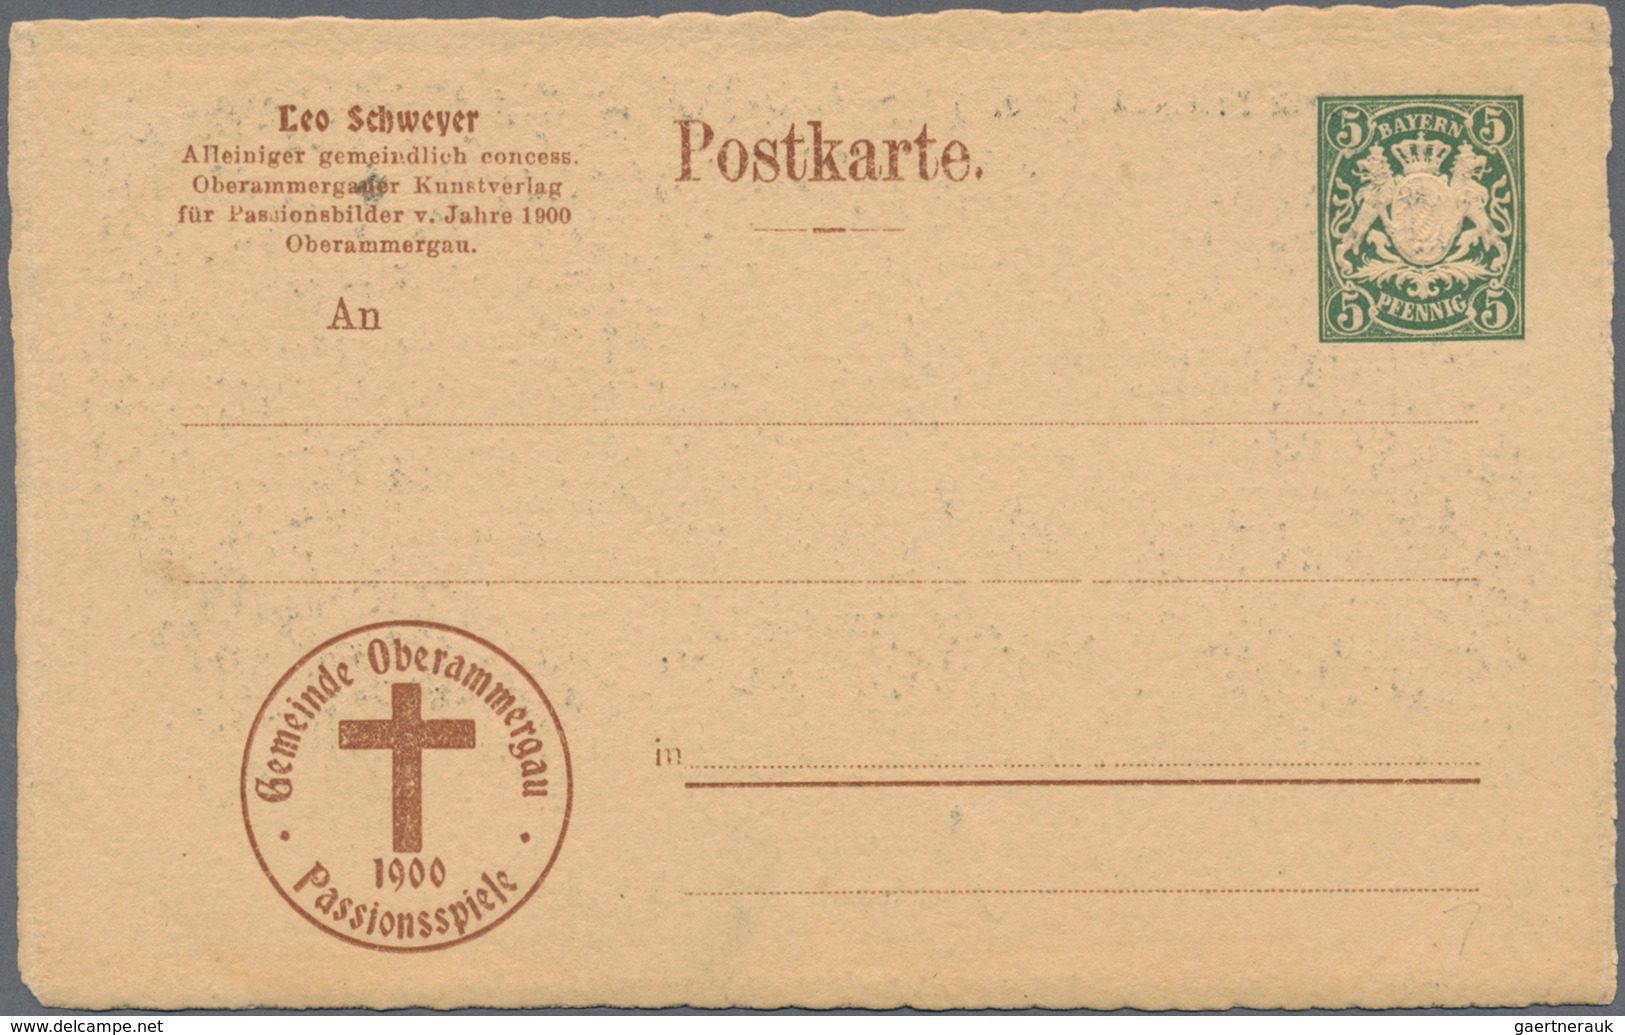 Europa: 1890/1960 (ca.), holding of several hundred covers/cards, comprising Vatican, Iceland, Greec